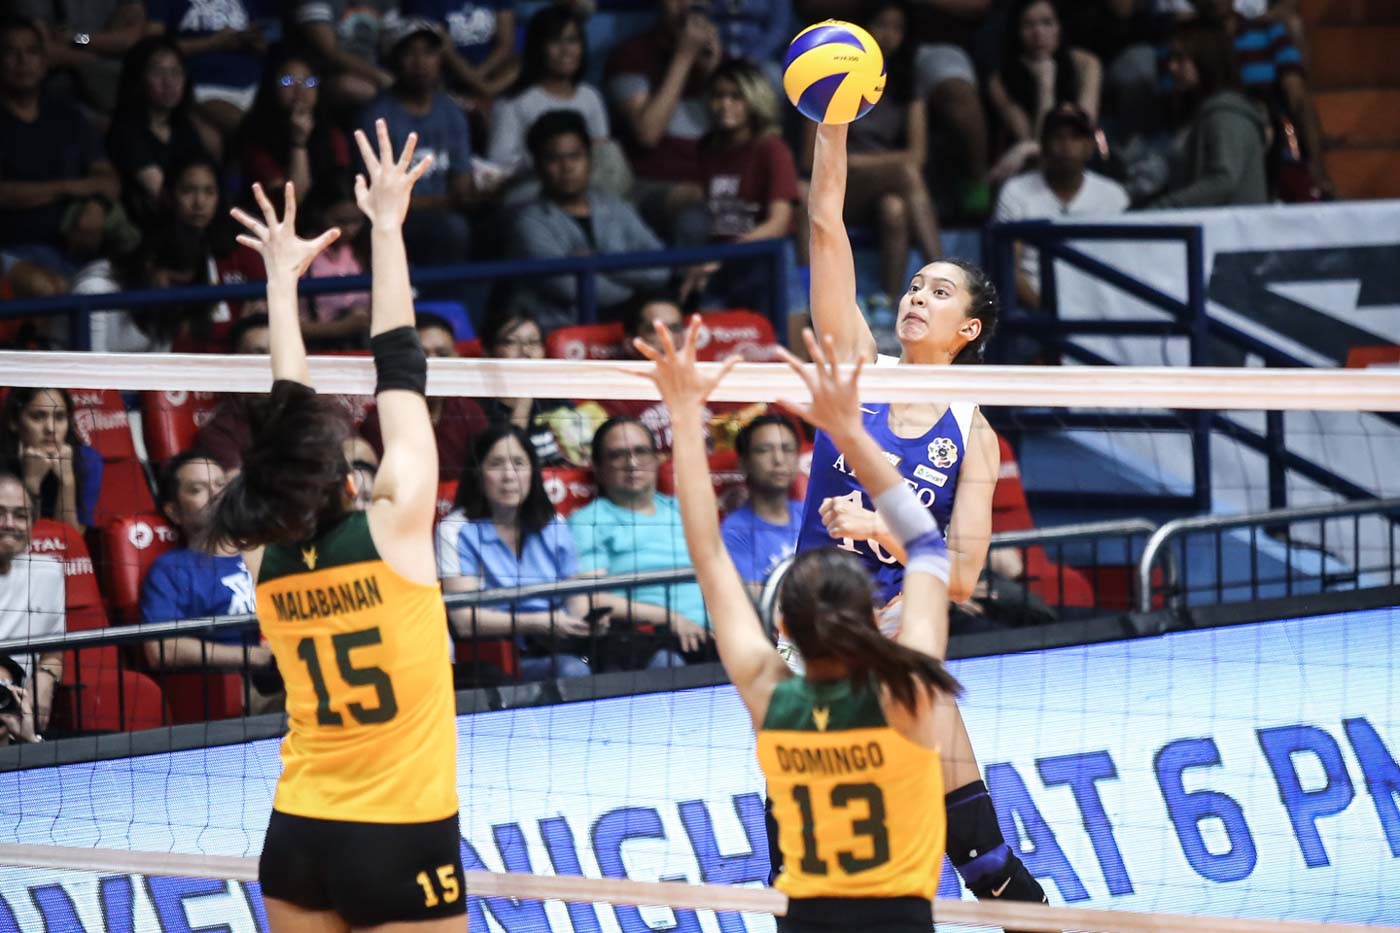 TRUST. The Ateneo Lady Eagles trust in their capabilities to pull though a tough match against FEU.  Photo by Josh Albelda/Rappler 